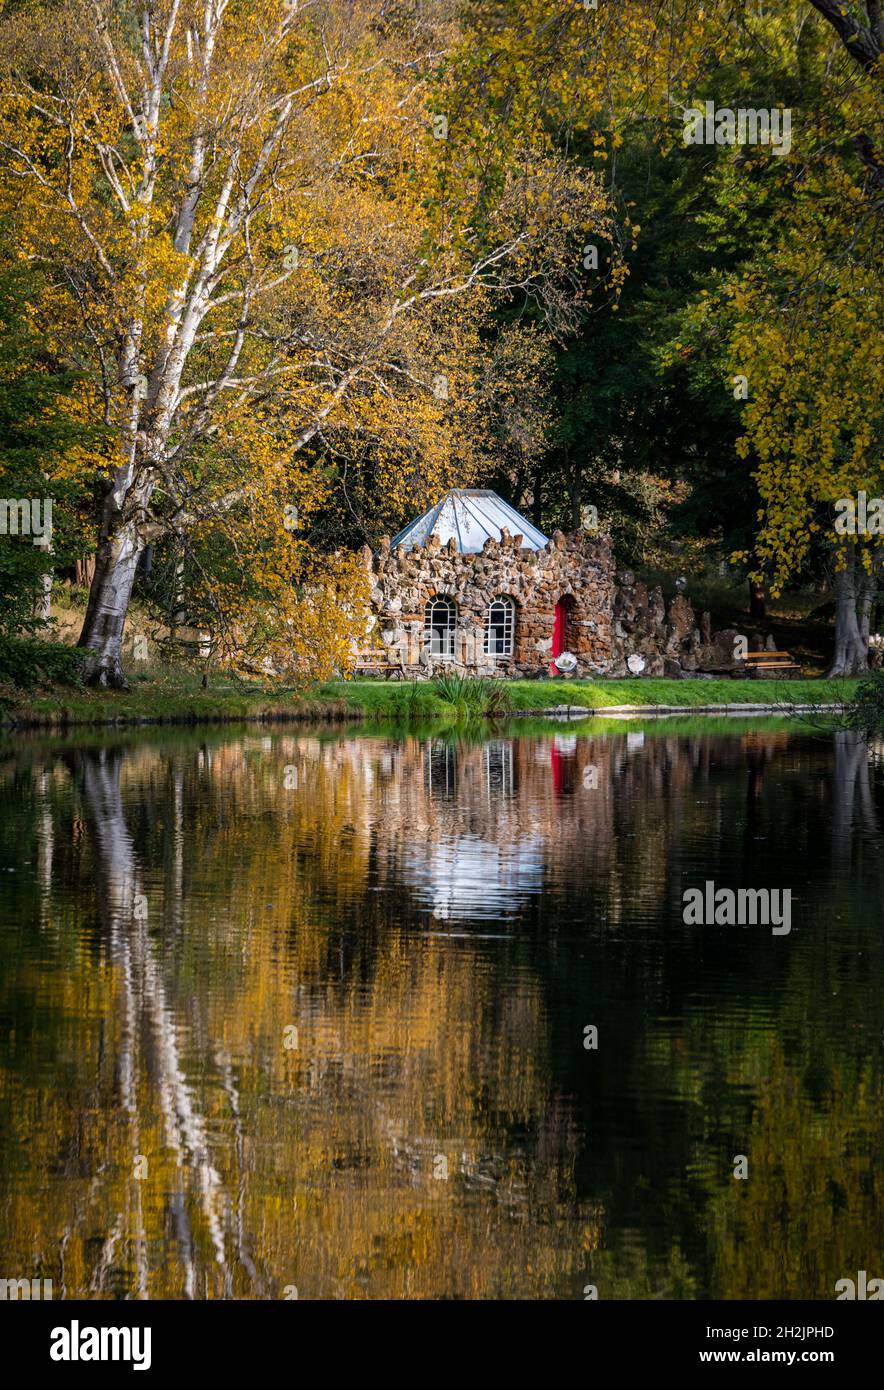 Gosford Estate, East Lothian, Scotland, United Kingdom, 22nd October 2021. UK Weather: Autumn colours: sunshine lights up reflections of the Autumnal trees and the quirky rubble stone curling lodge on the artificial lake in the estate Stock Photo